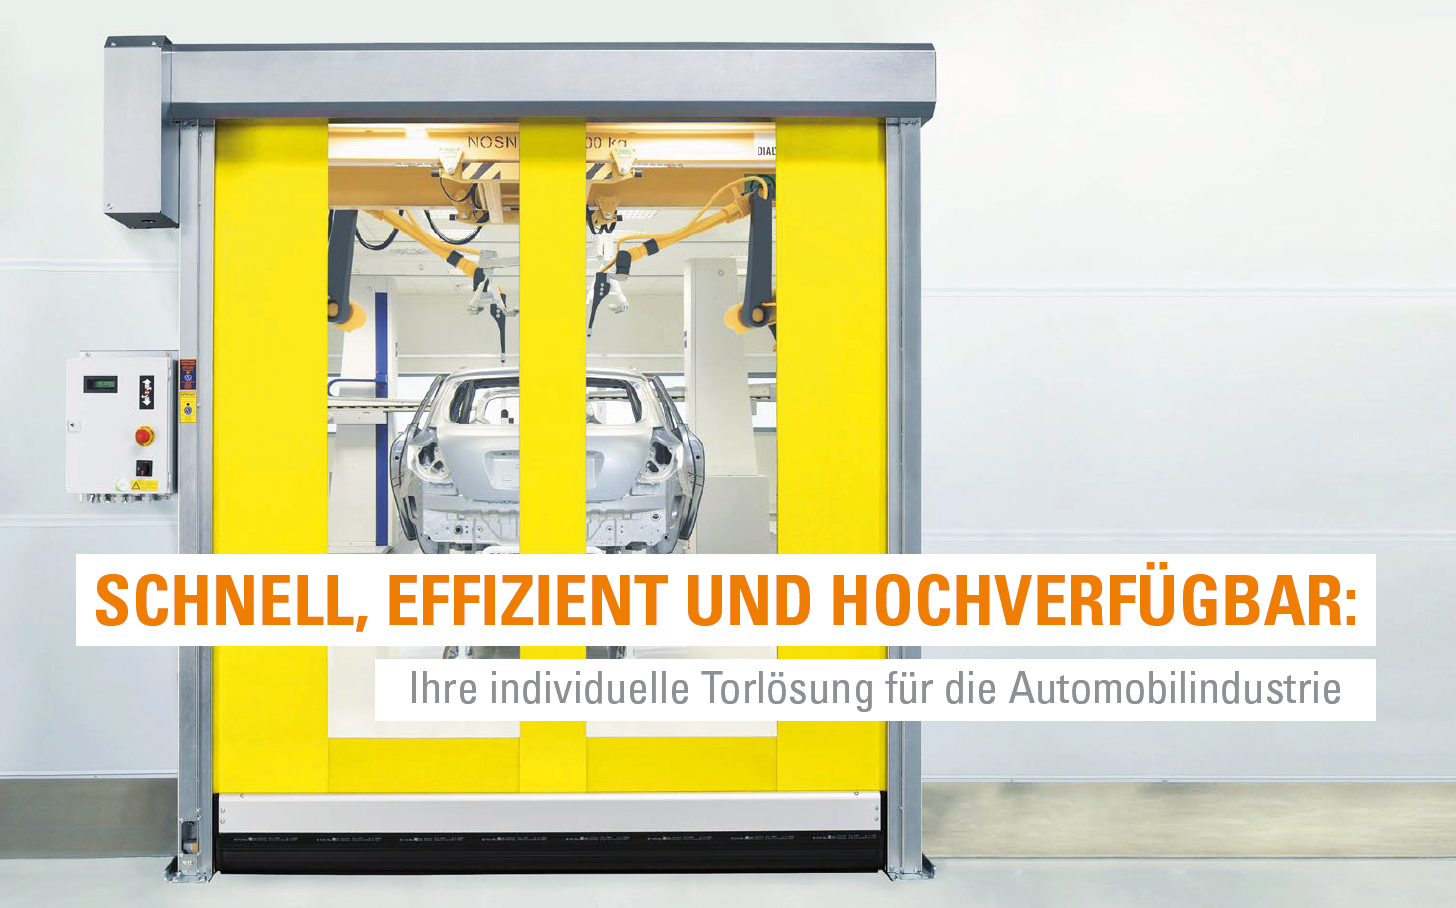 Special doors in the automotive sector